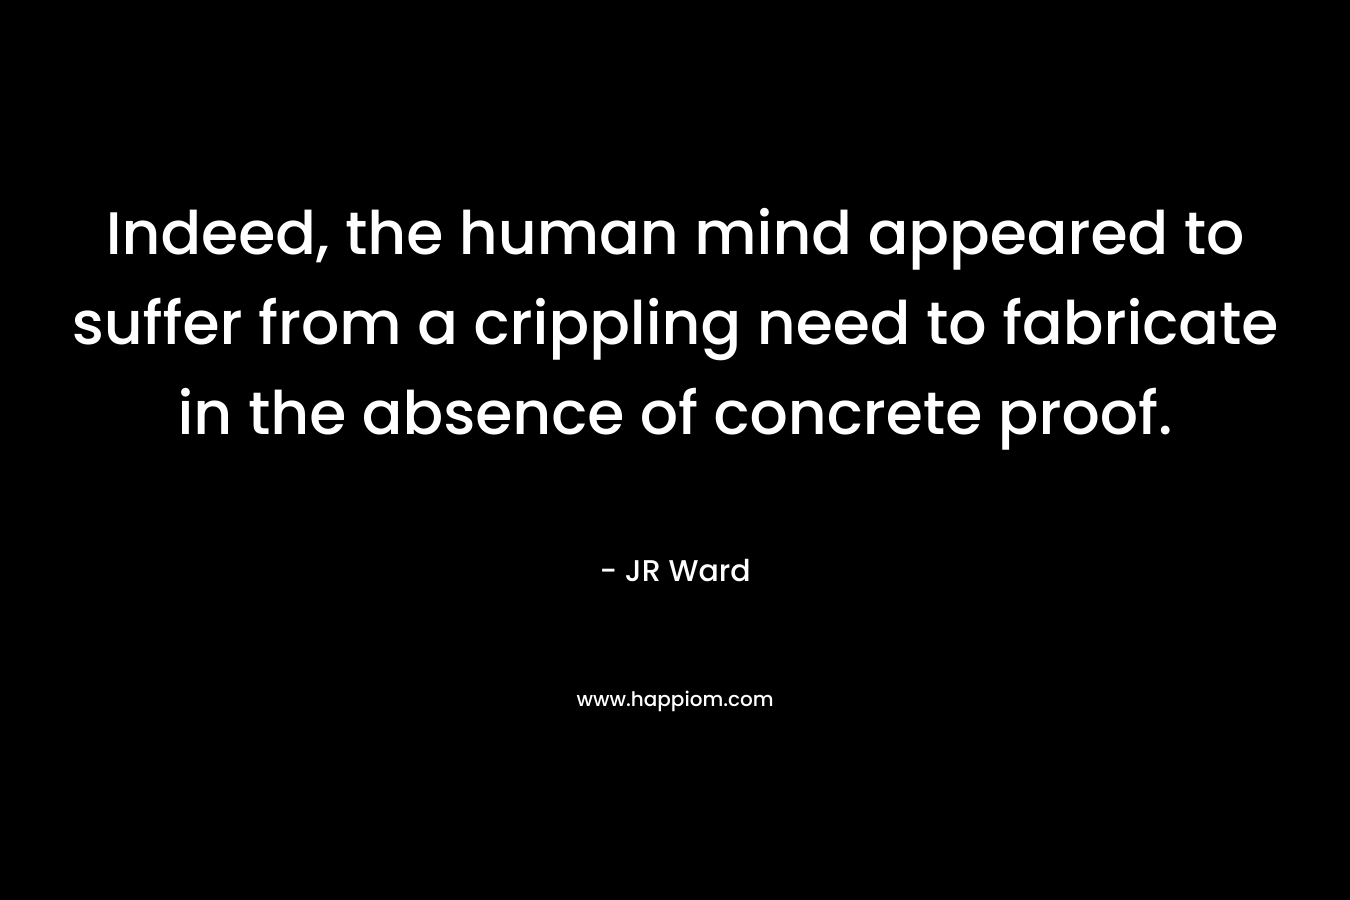 Indeed, the human mind appeared to suffer from a crippling need to fabricate in the absence of concrete proof.